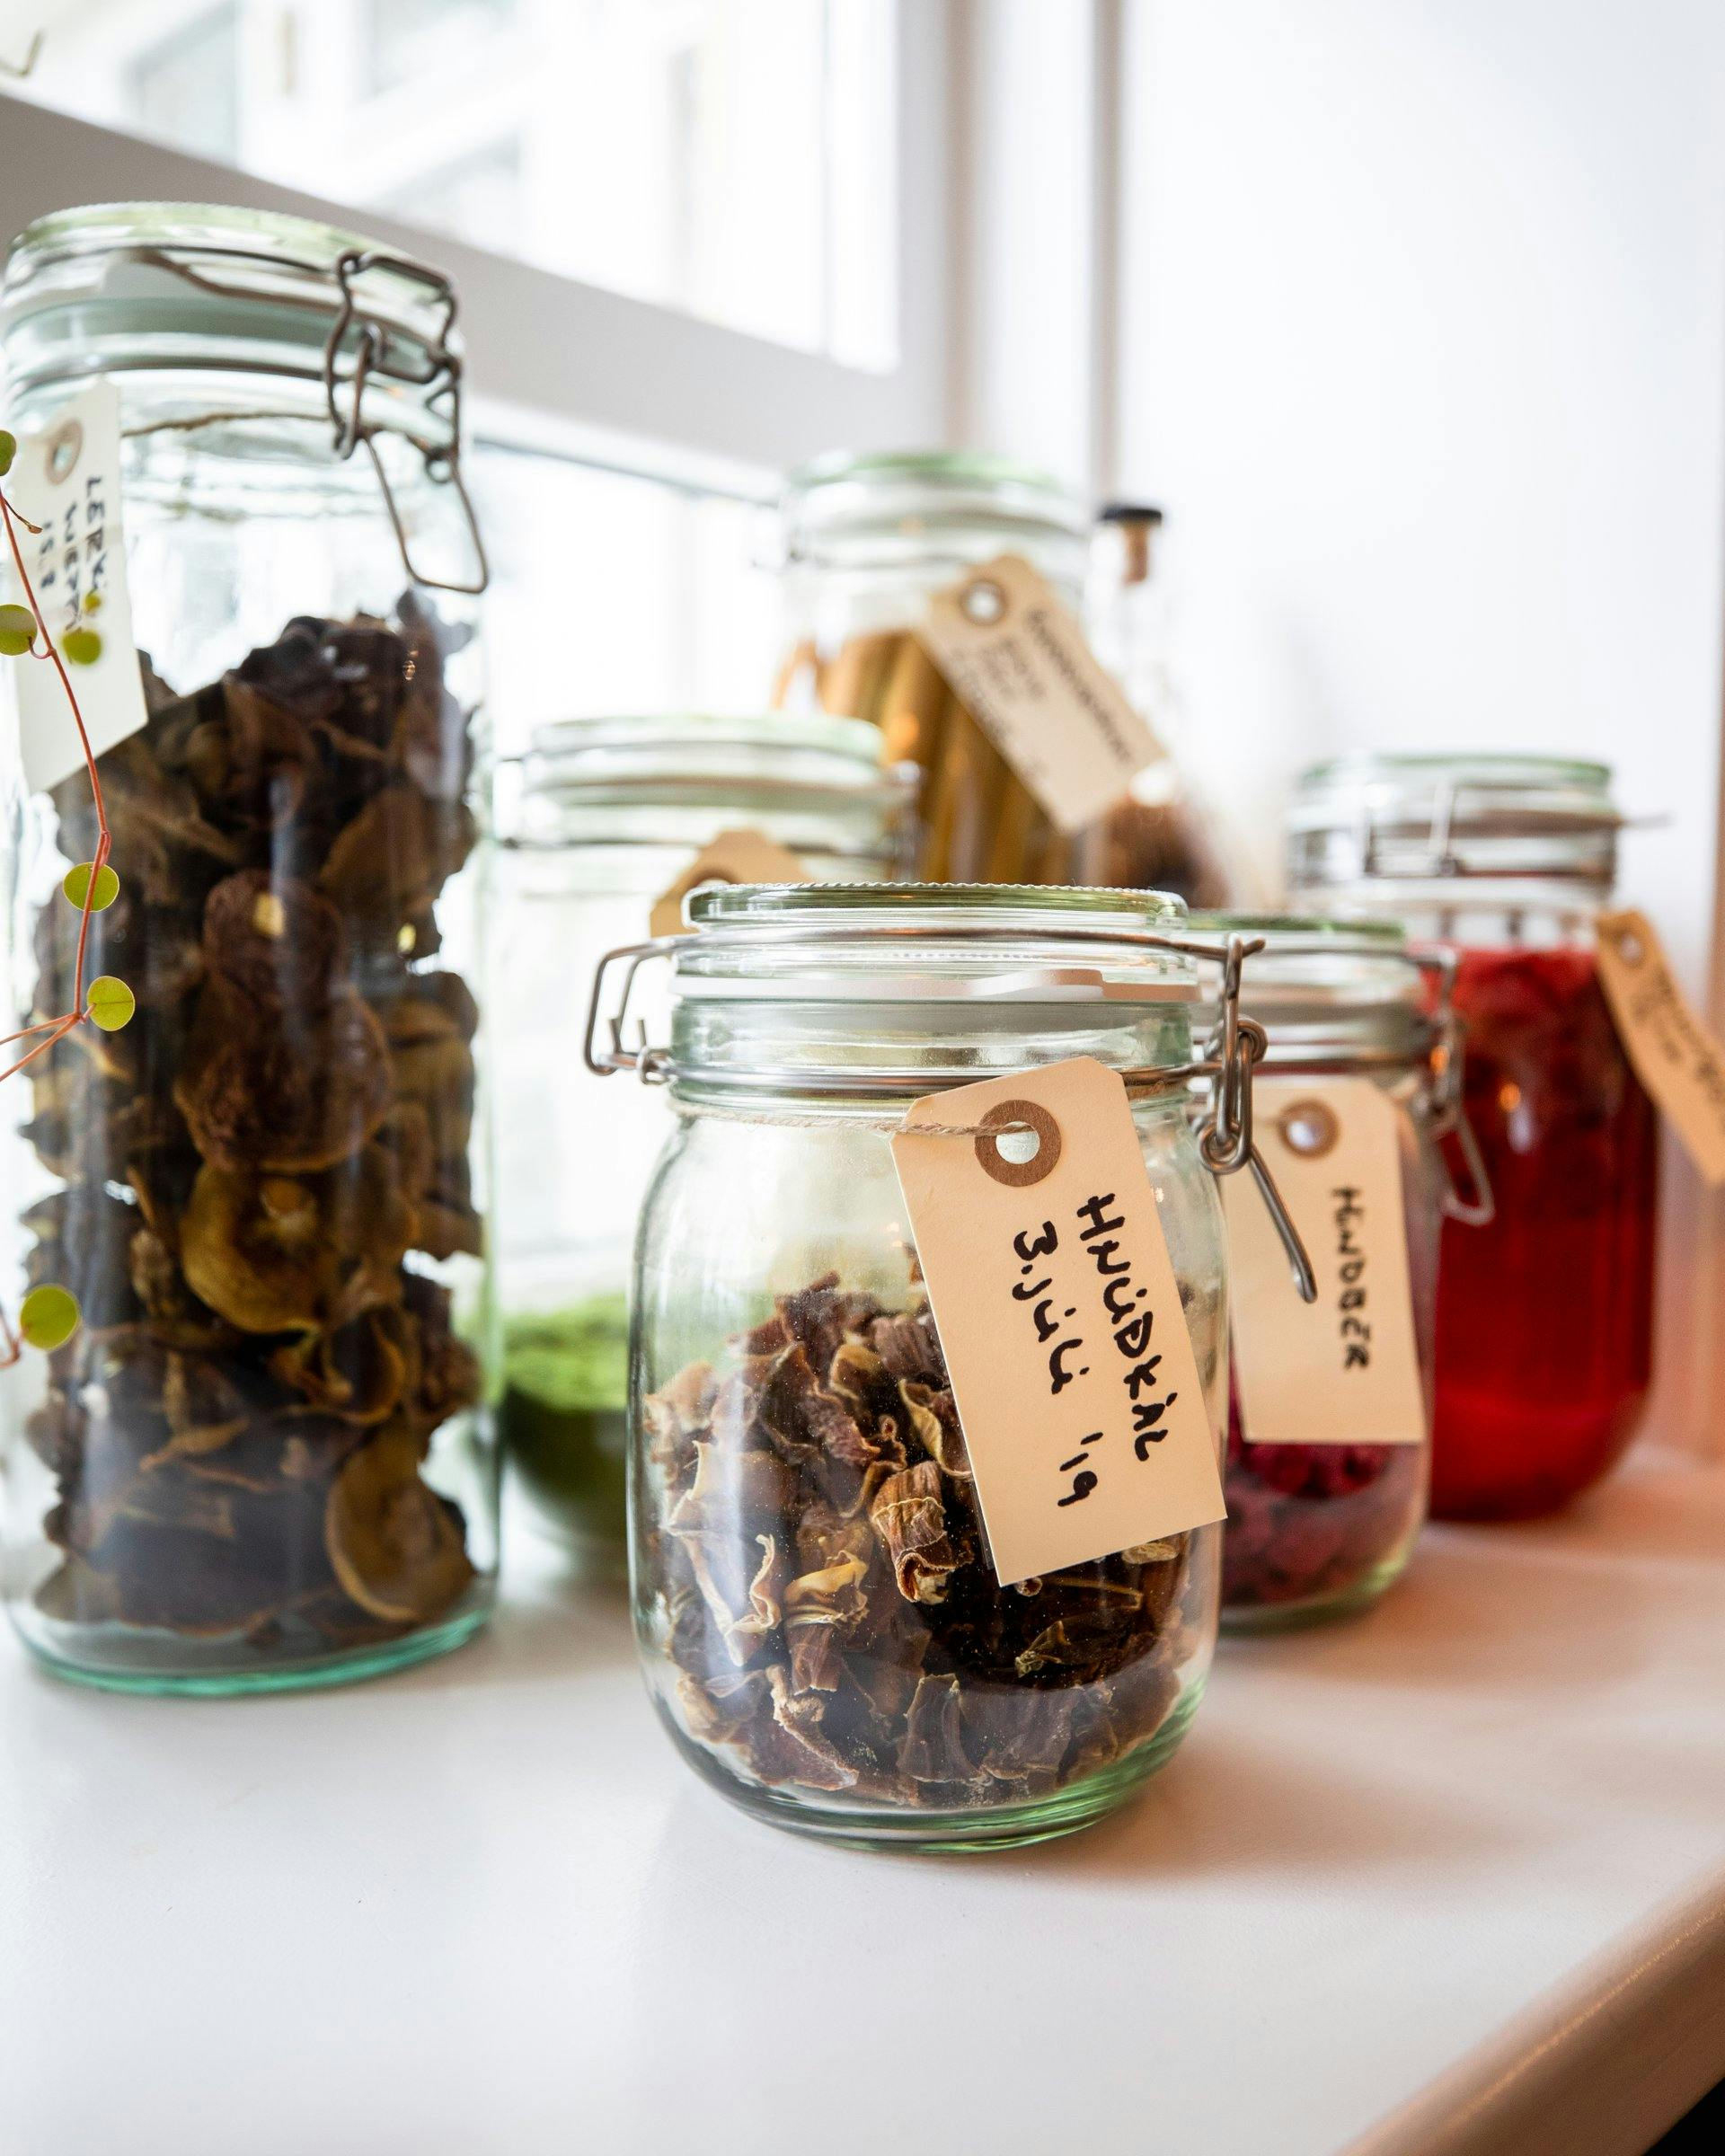 Preserving jars with dried fruit and vegetables on a window sill